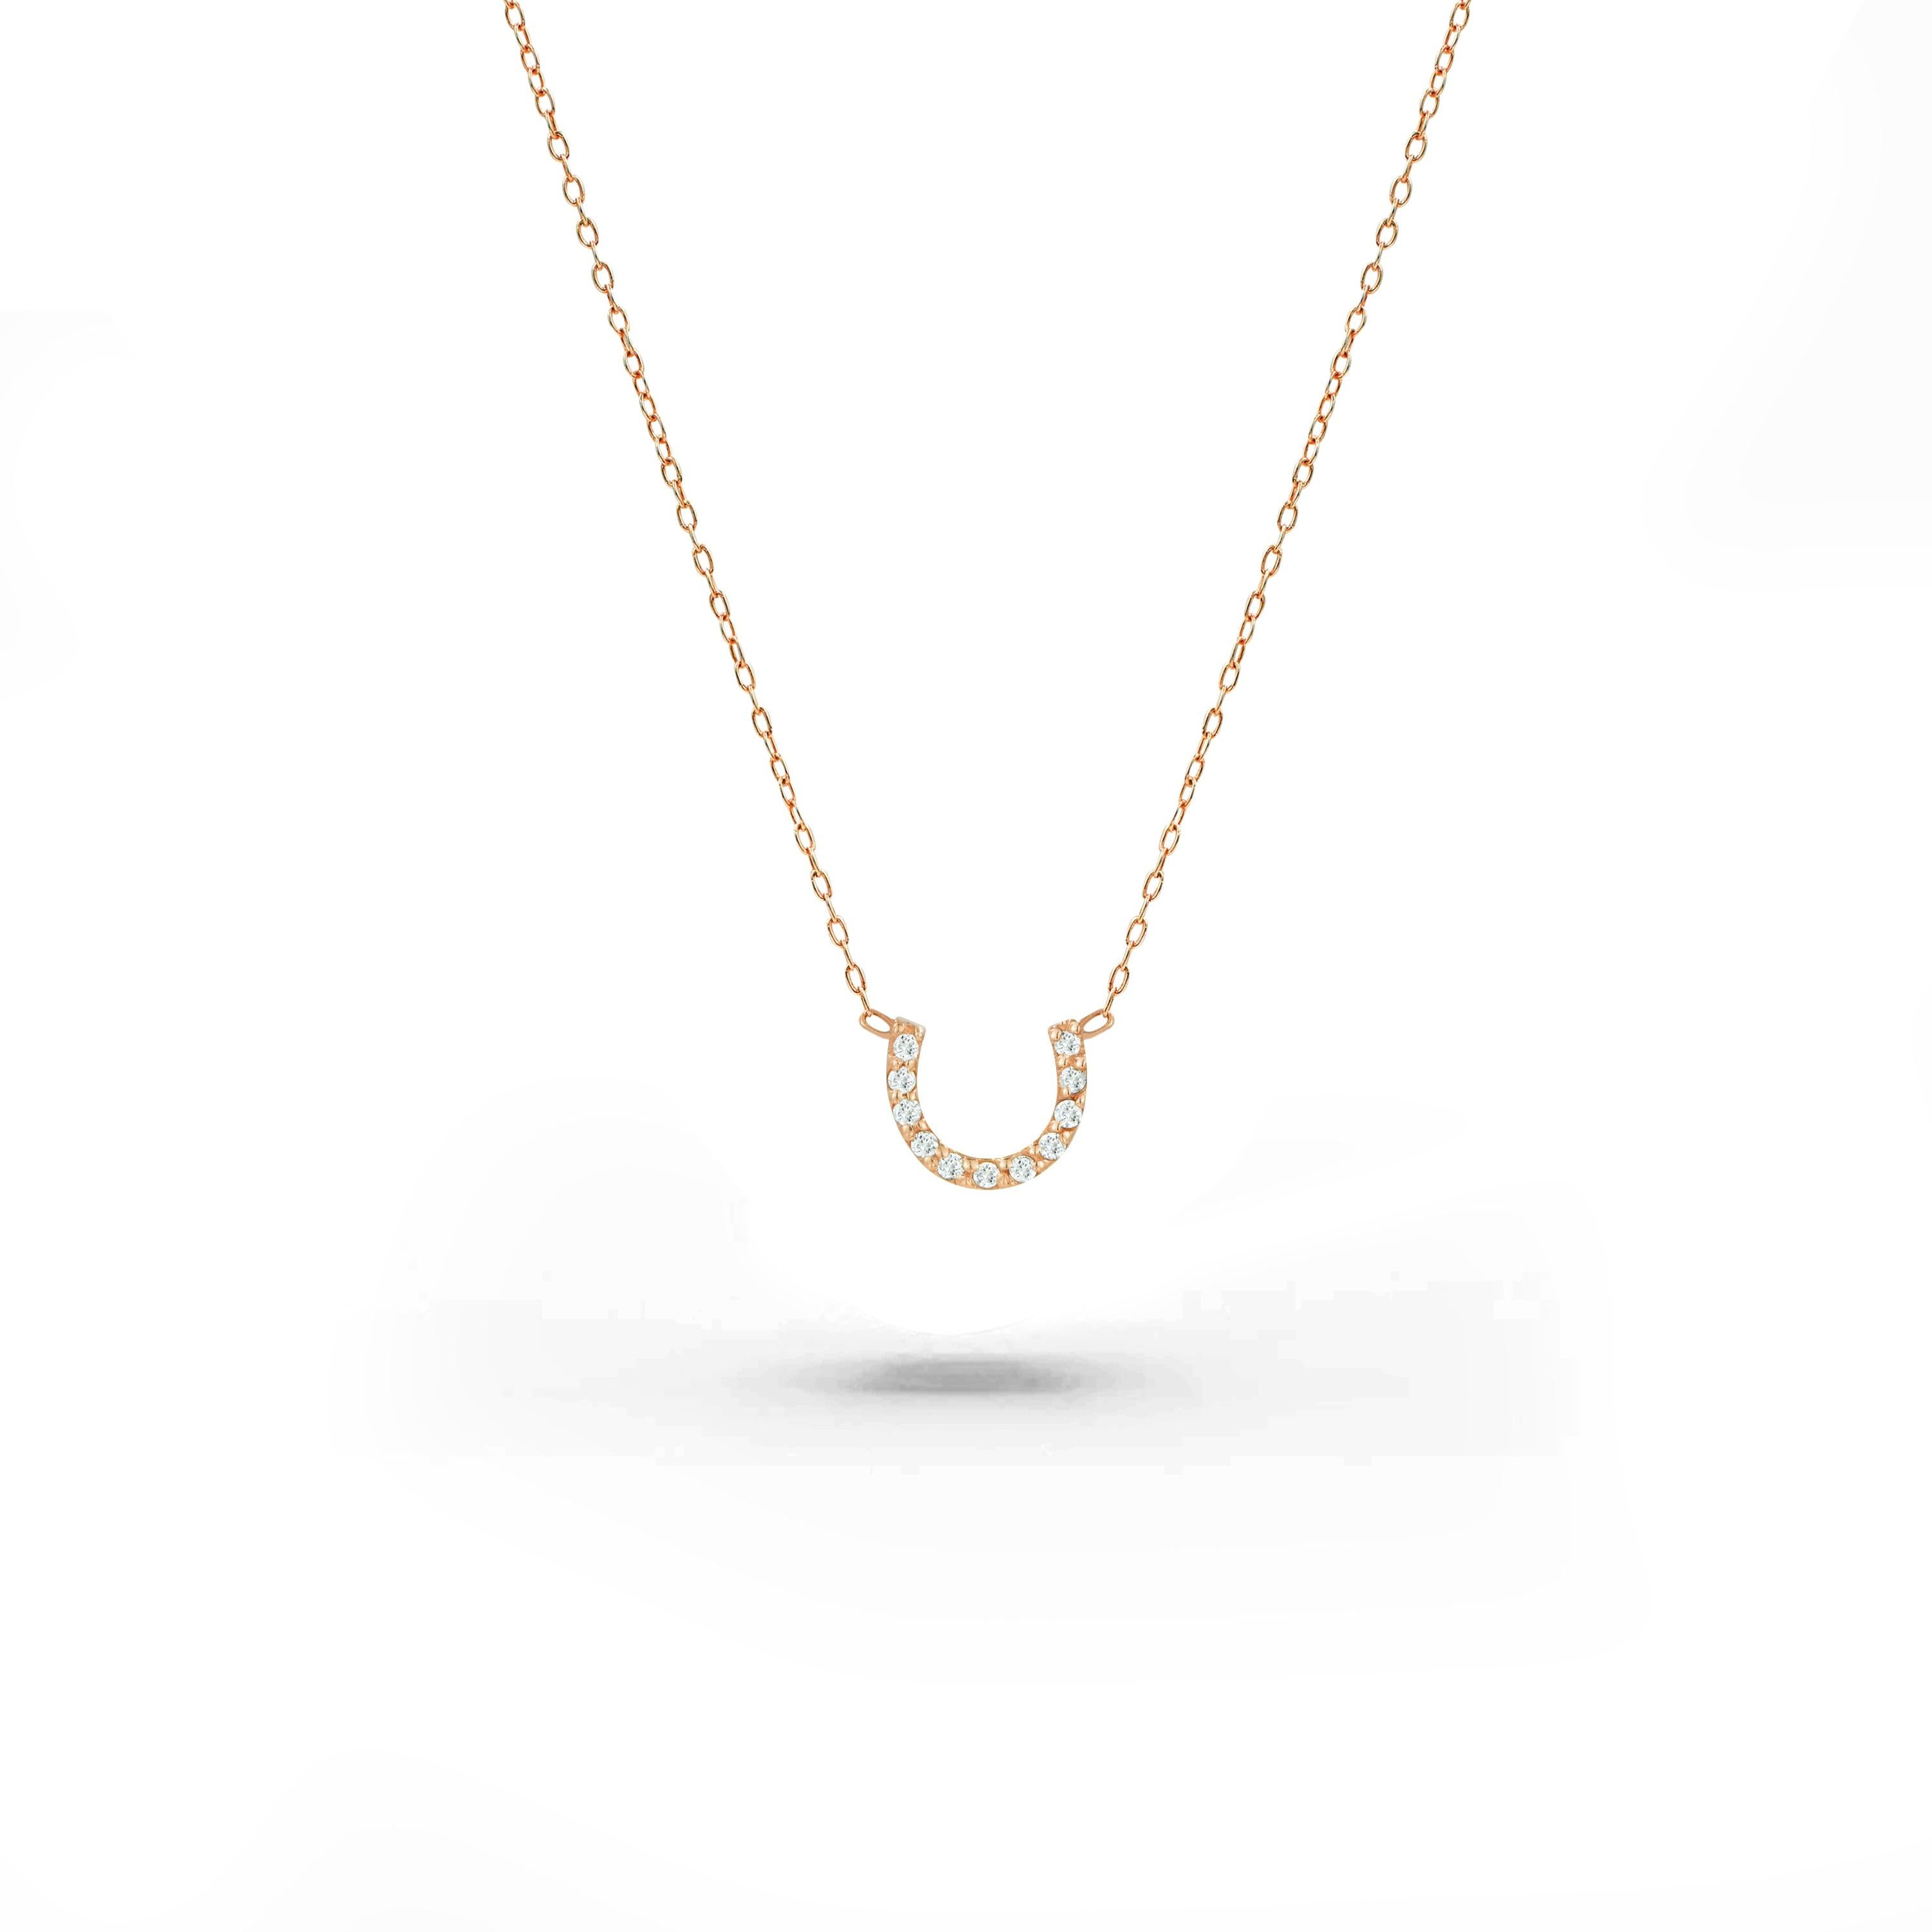 Dainty Horseshoe Diamond Necklace is made of 14k solid gold available in three colors of gold, White gold / Rose Gold / Yellow Gold.

Lightweight and gorgeous natural genuine round cut diamond. Each diamond is hand selected by me to ensure quality